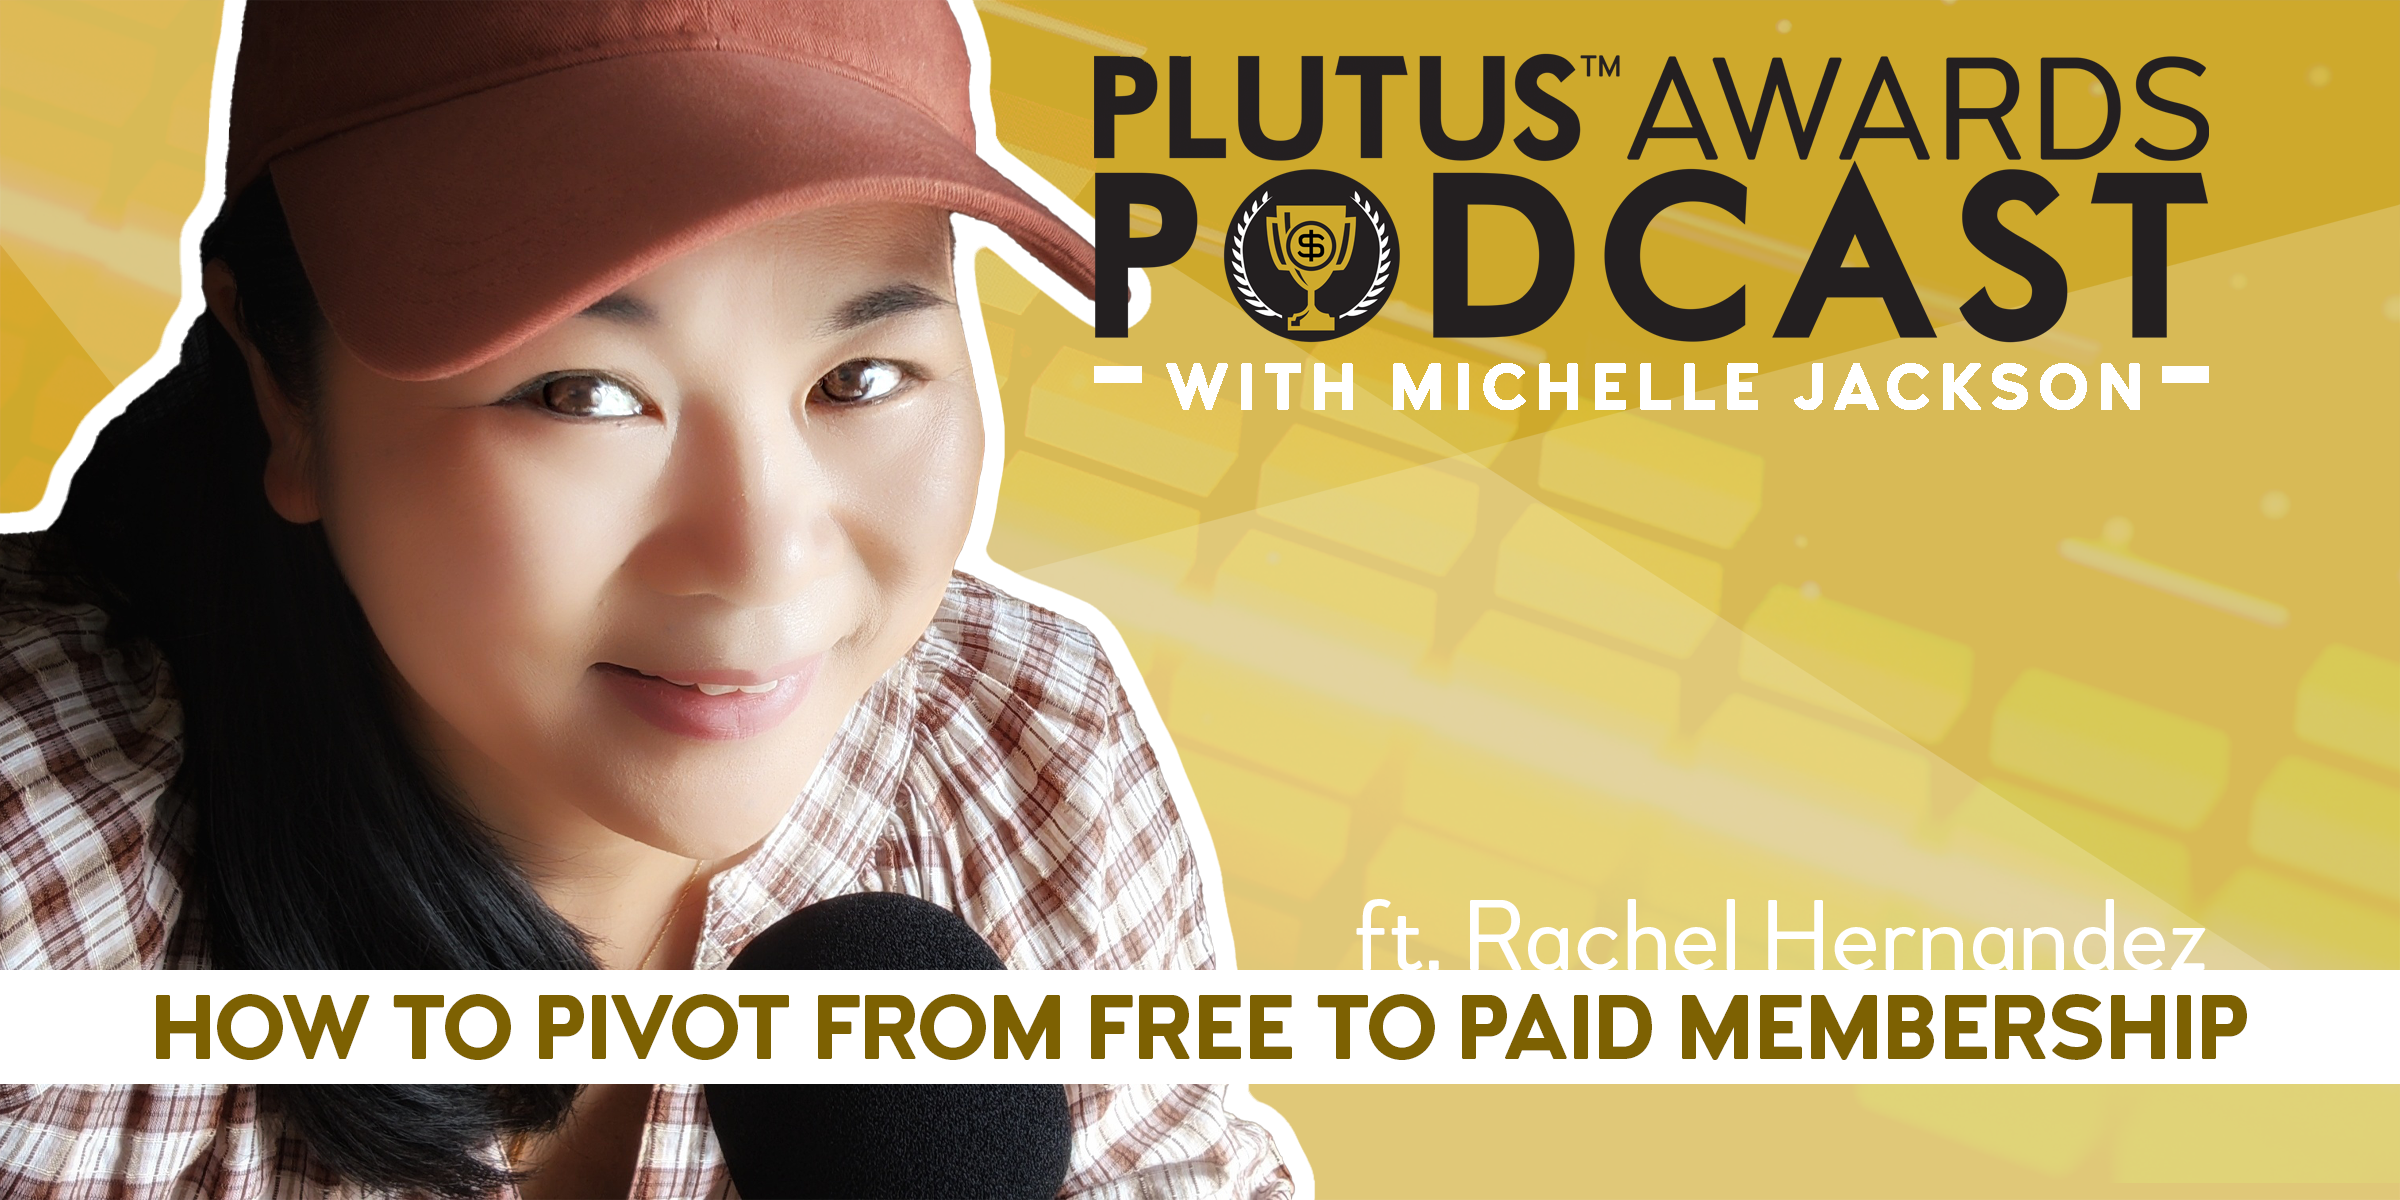 Plutus Awards Podcast - Mobile Home Gurl Cover